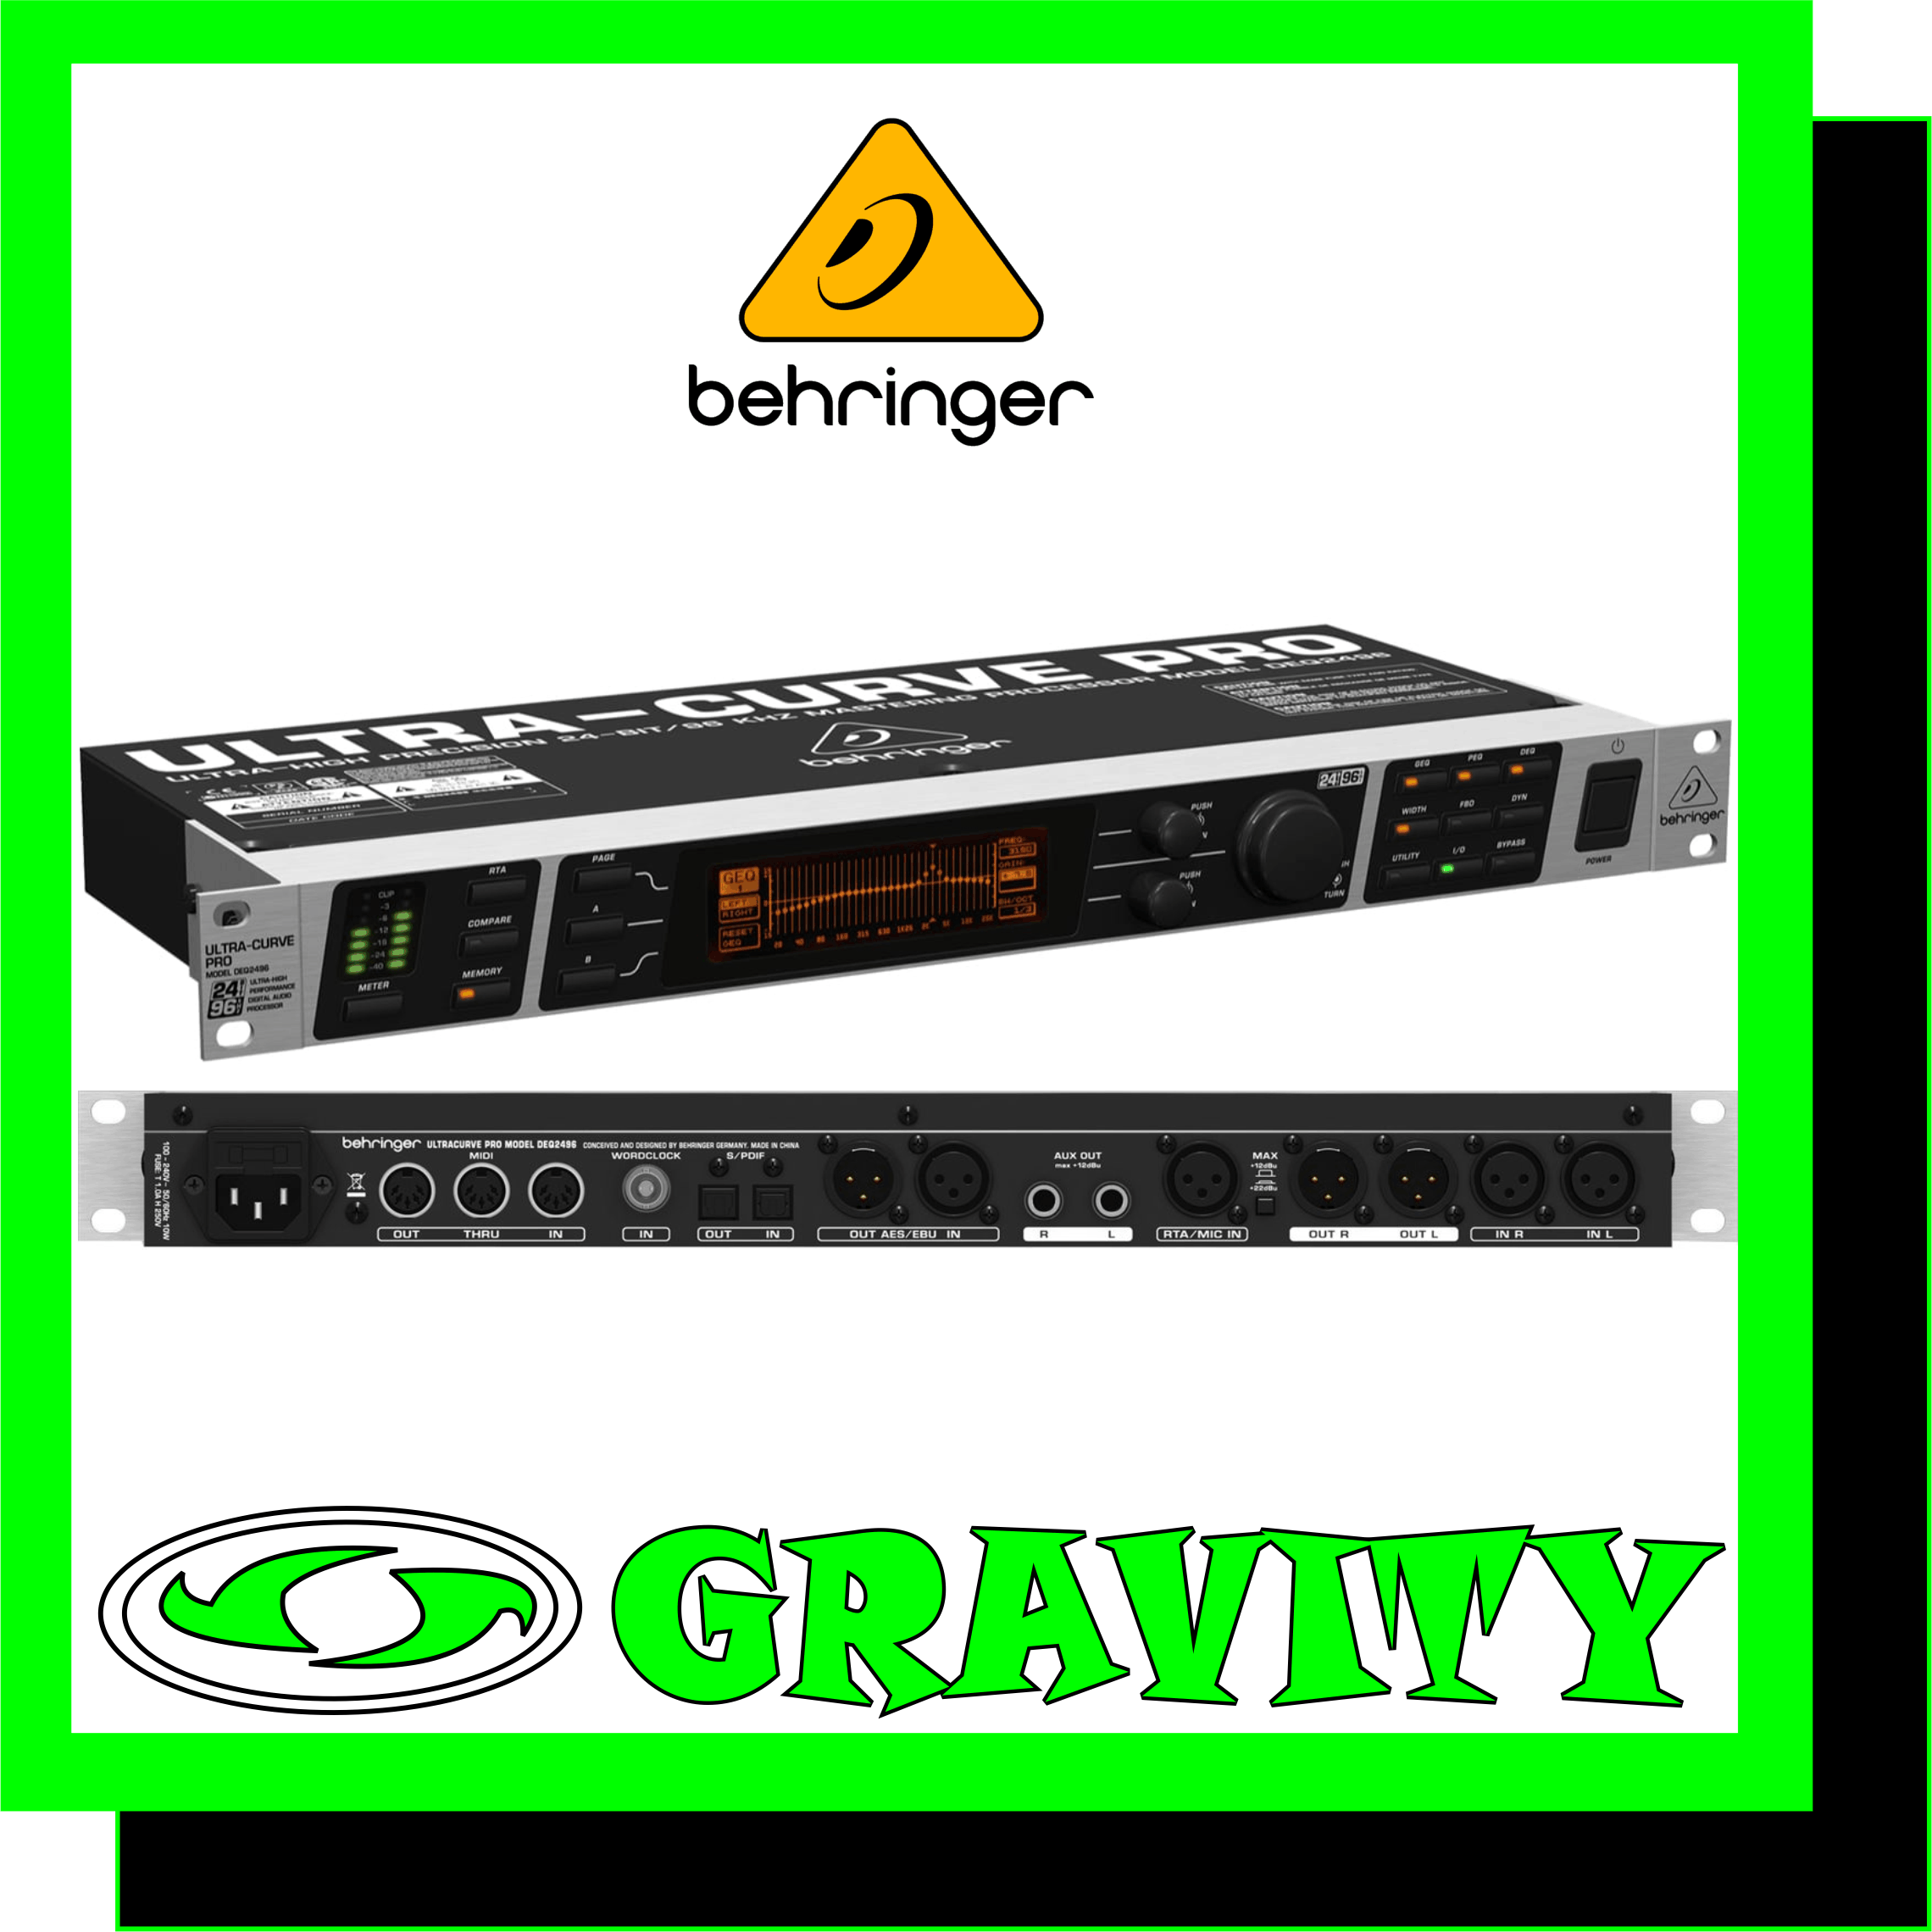 ULTRACURVE PRO DEQ2496 Ultra-High Precision 24-Bit/96 kHz Equalizer, Analyzer, Feedback Destroyer and Mastering Processor  -Ultra-high resolution 24-bit/96 kHz mastering processor featuring 32/40-bit floating-point DSP technology -Audiophile 24-bit/96 kHz A/D - and D/A converters offering 113 dB dynamic range -4 concurrently selectable EQ modules (31-band graphic EQ, 10-band parametric EQ, Feedback Destroyer plus 3 Dynamic EQs per stereo channel) -Ultra-high resolution 61-band real-time FFT analyzer with additional auto EQ function for room and loudspeaker equalization -Unique VPQ (Virtual Paragraphic EQ) option allows parametric control of graphic EQs -State-of-the-art compressor/expander with peak limiter per stereo channel, additional stereo imager and stereo delay for delay line applications -Multi-functional level meters (peak/RMS, VU and SPL meter with dBA/dBC weighting via RTA/Mic input) -64 user memories for complete setups and/or individual module configurations -Separate mic/line input with phantom power for RTA and Auto-EQ applications -Balanced inputs and servo-balanced outputs with gold-plated XLR connectors, stereo aux output, AES/EBU and S/PDIF inputs and outputs (XLR and optical) -Professional Wordclock input and MIDI connections for full remote control, preset dumps and system updates -Open architecture allowing future software updates via MIDI -"Planet Earth" switching power supply for maximum flexibility (100  - 240 V~), noise-free audio, superior transient response plus low power consumption for energy saving